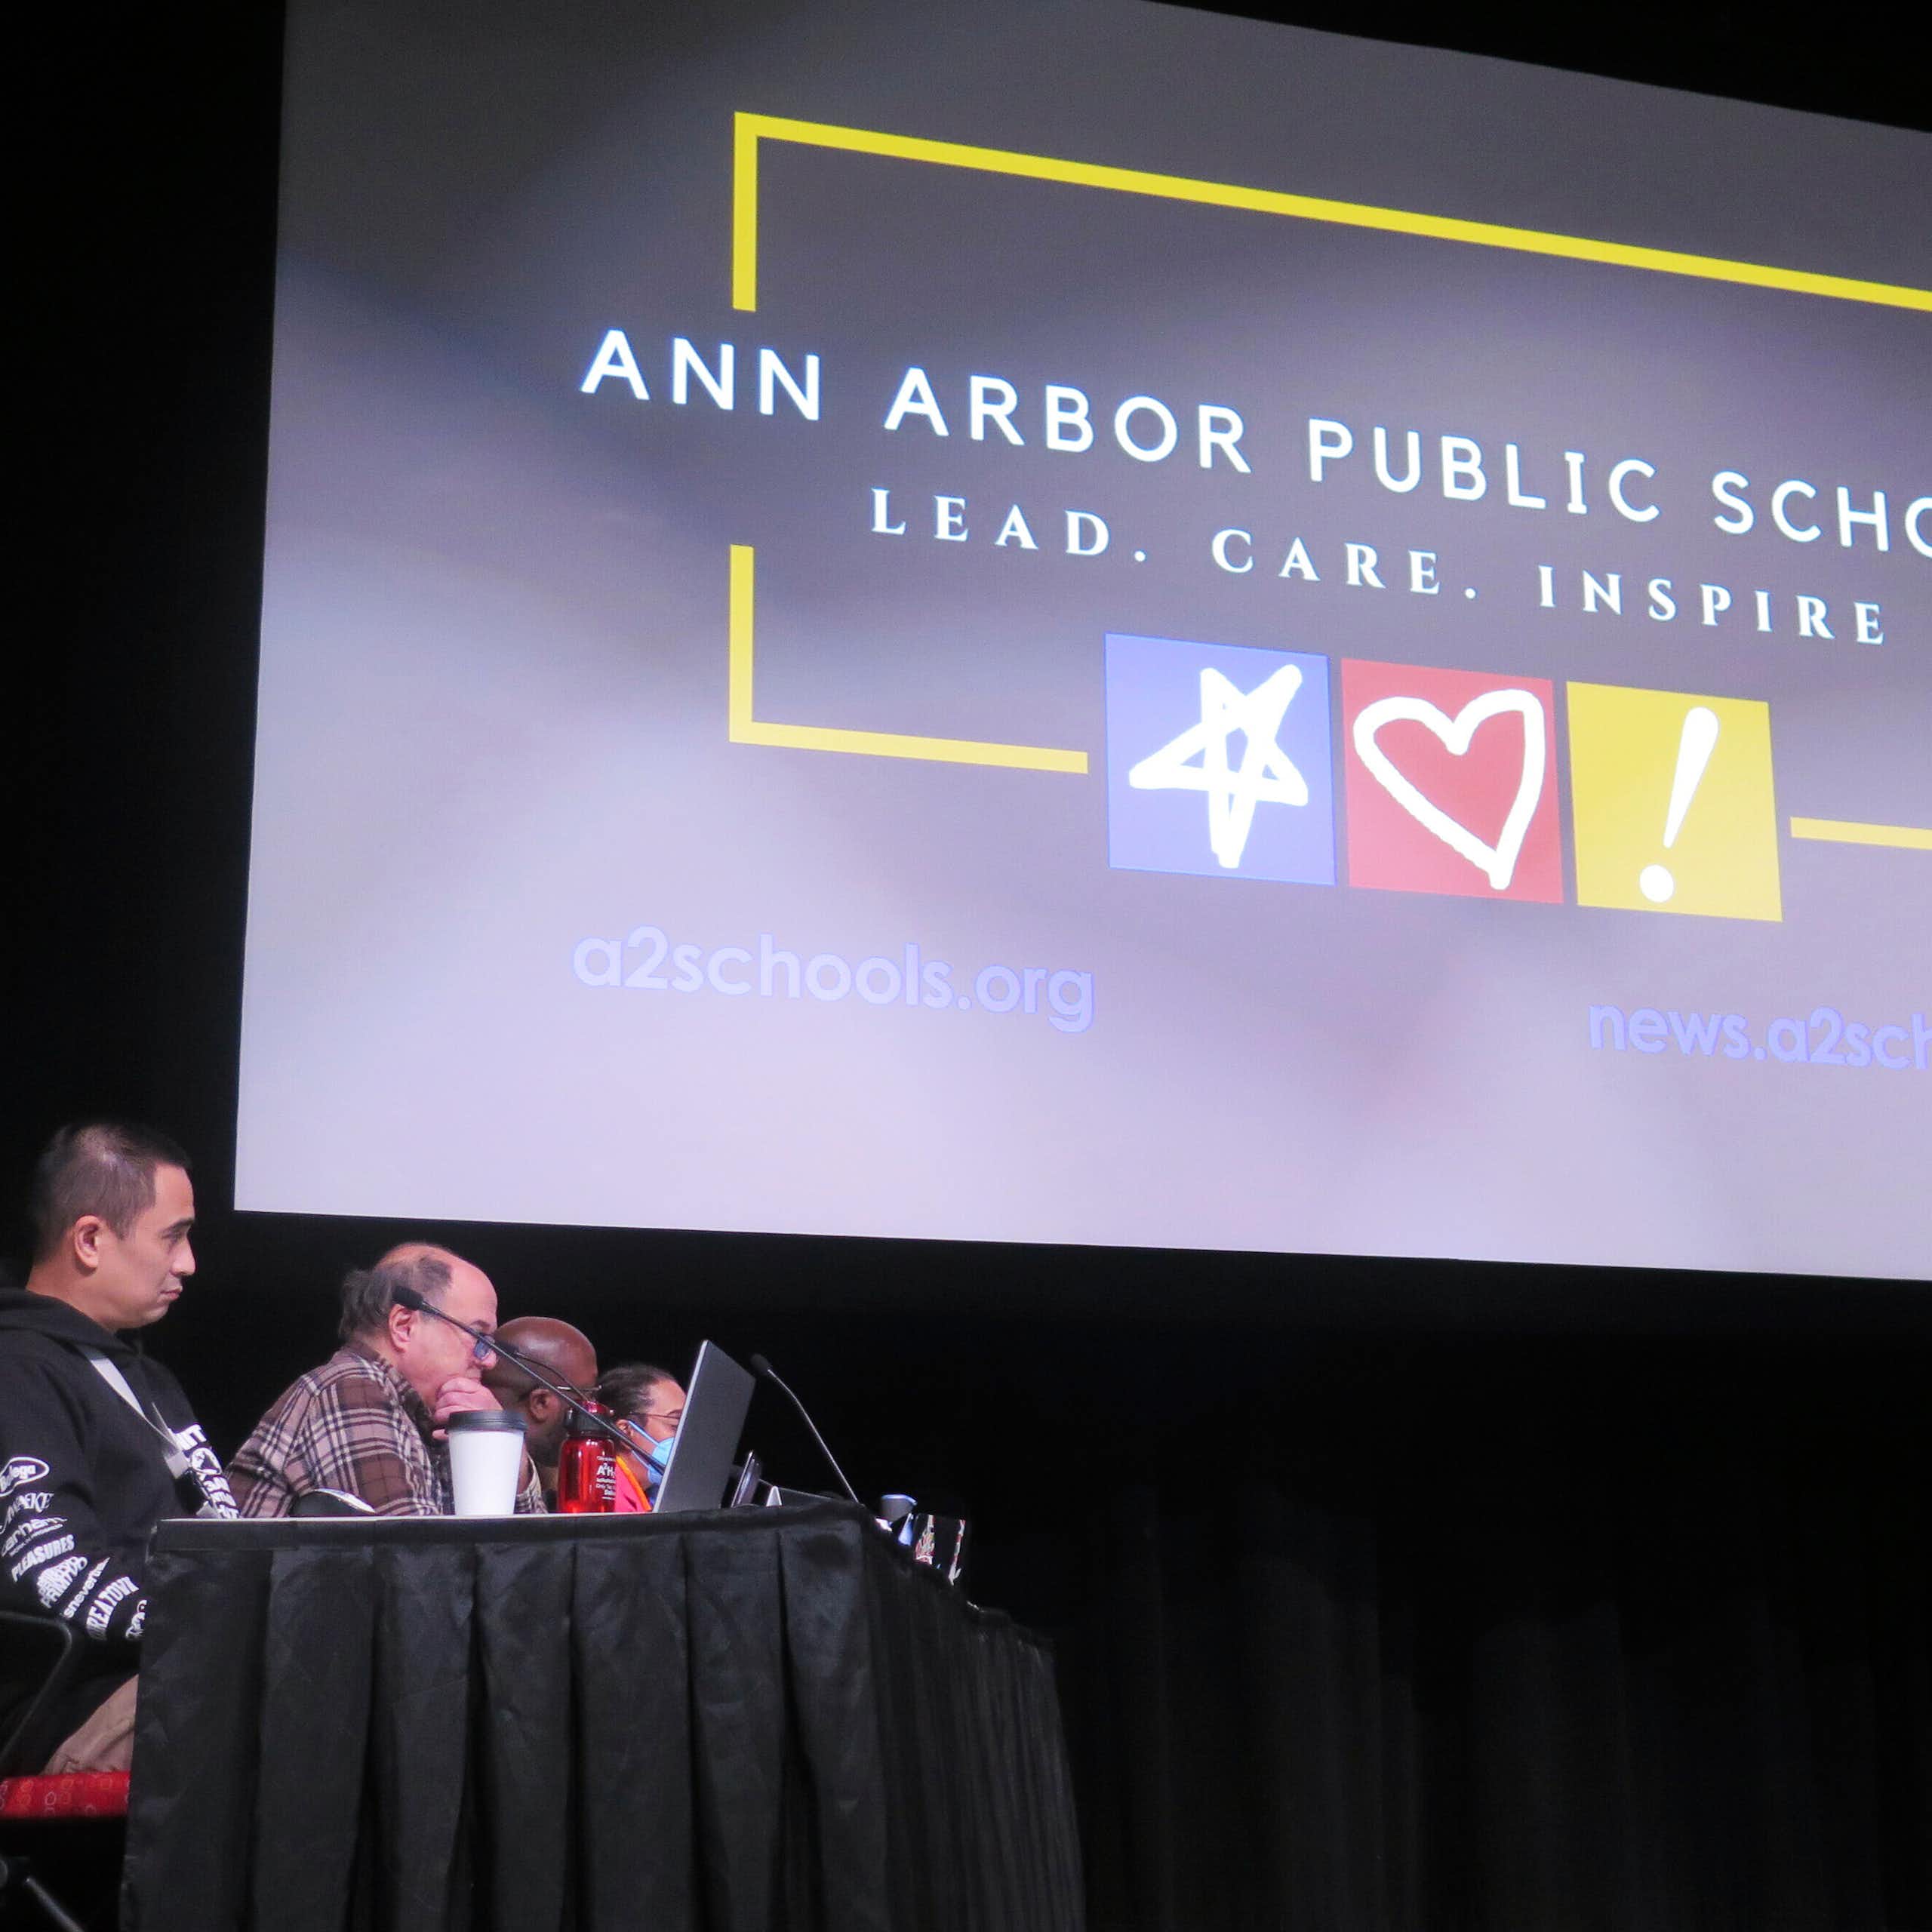 At least four people sitting at a skirted table, with the sign 'Ann Arbor Public Schools' above them.